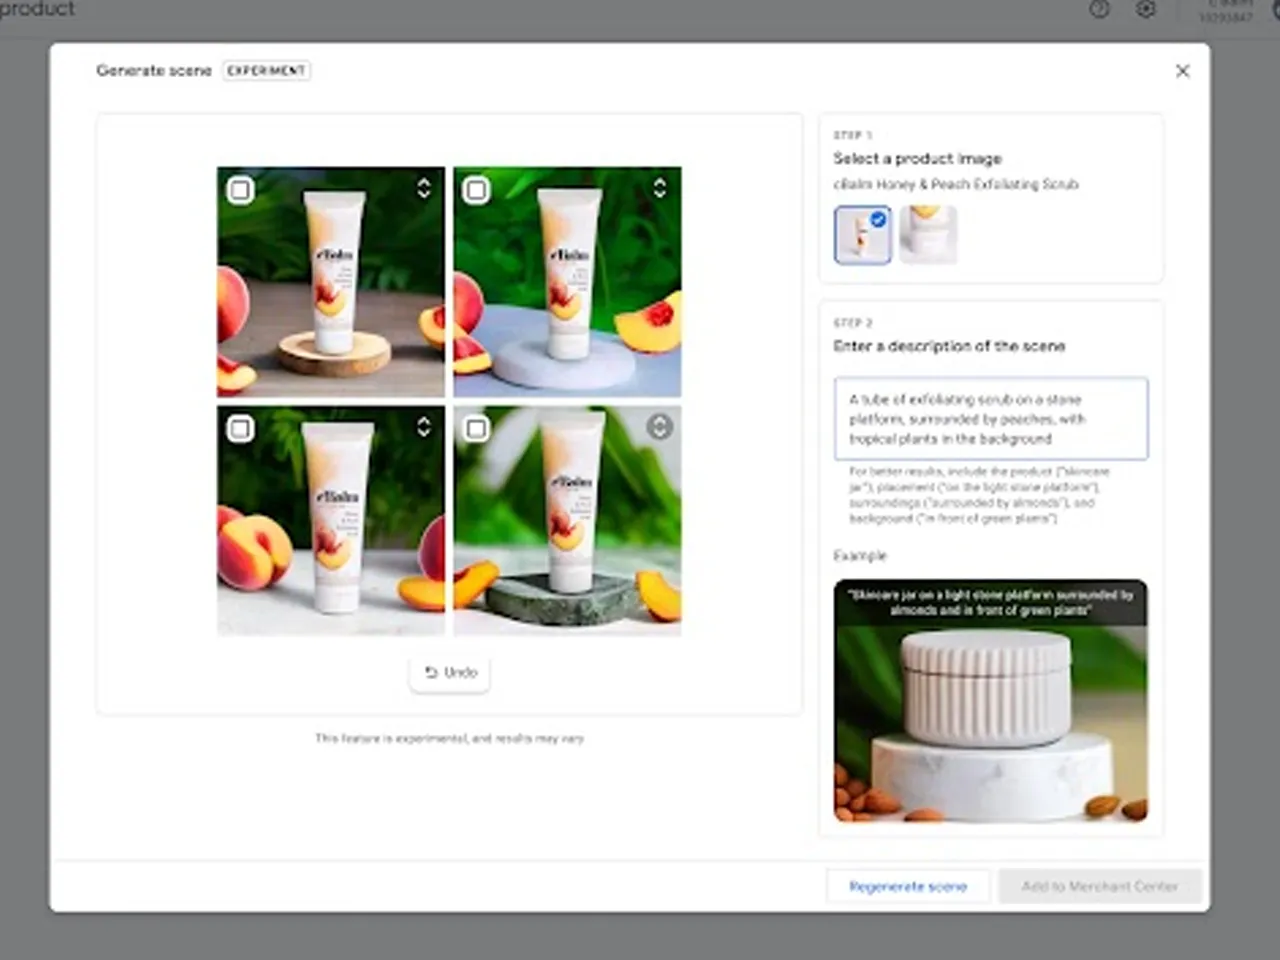 Google rolls out generative AI tools for product imagery to US advertisers